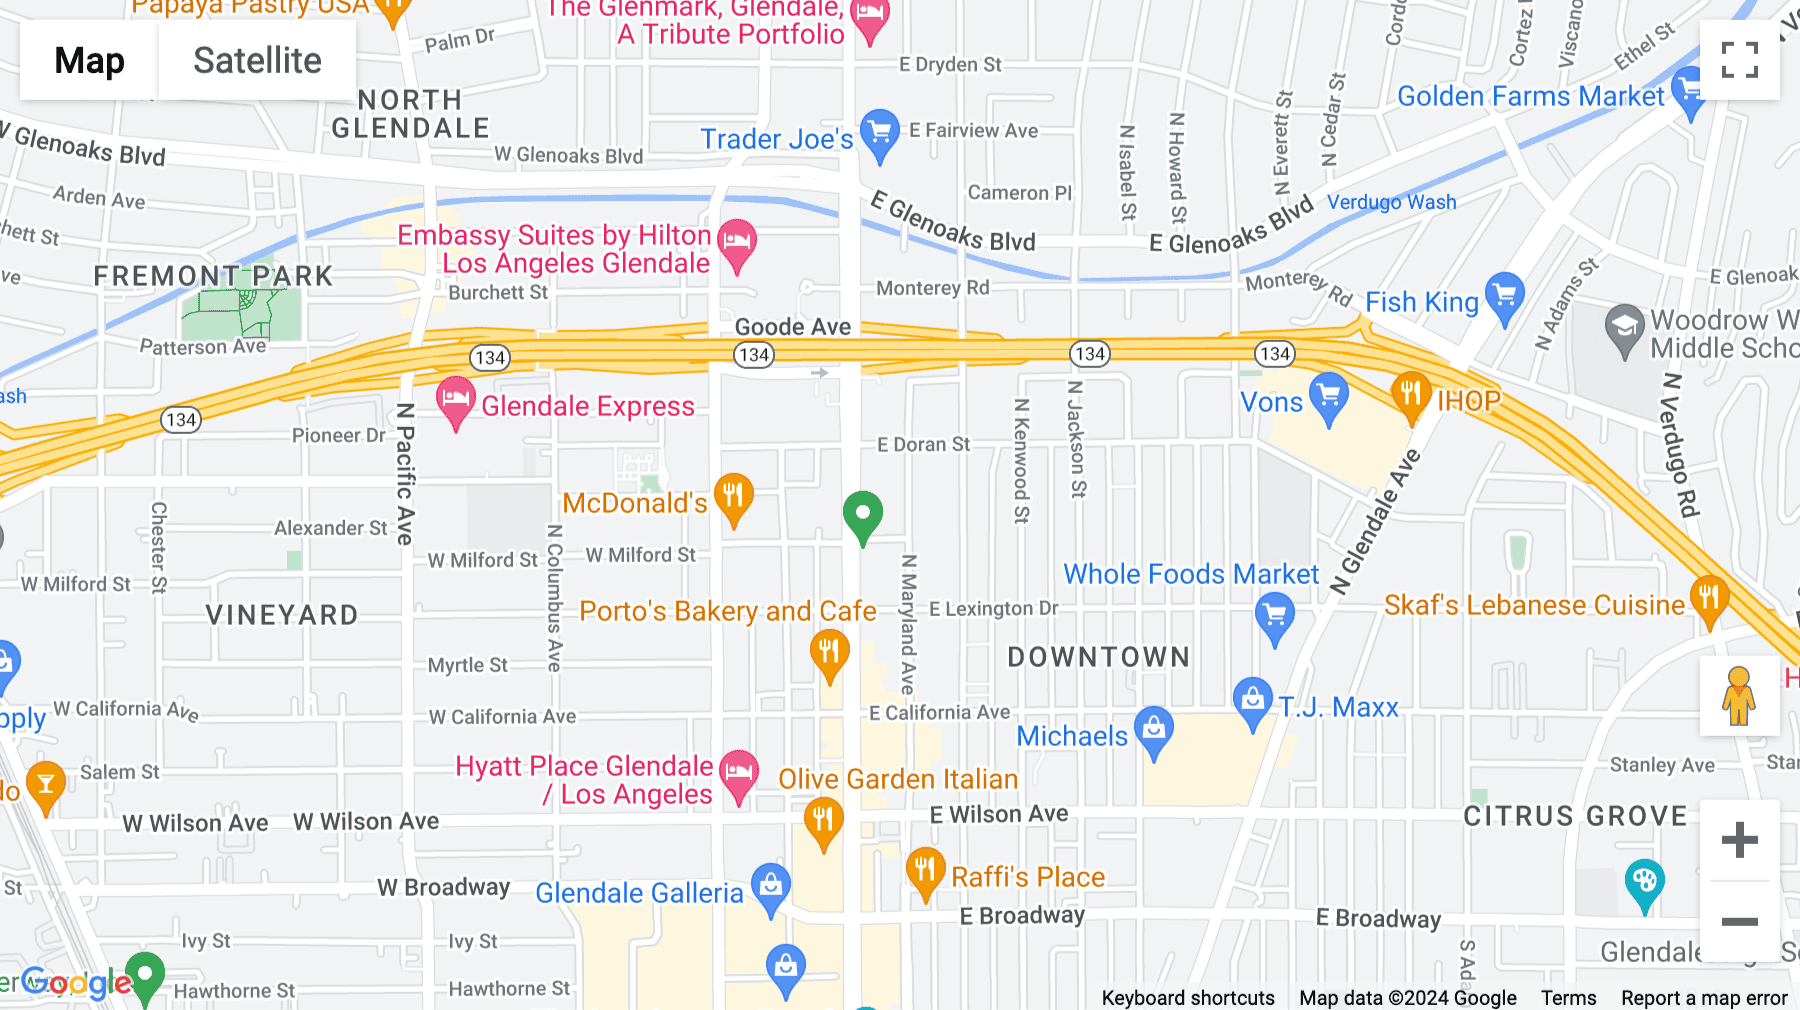 Click for interative map of 500 N Brand Blvd, 20th Floor, Glendale (California)